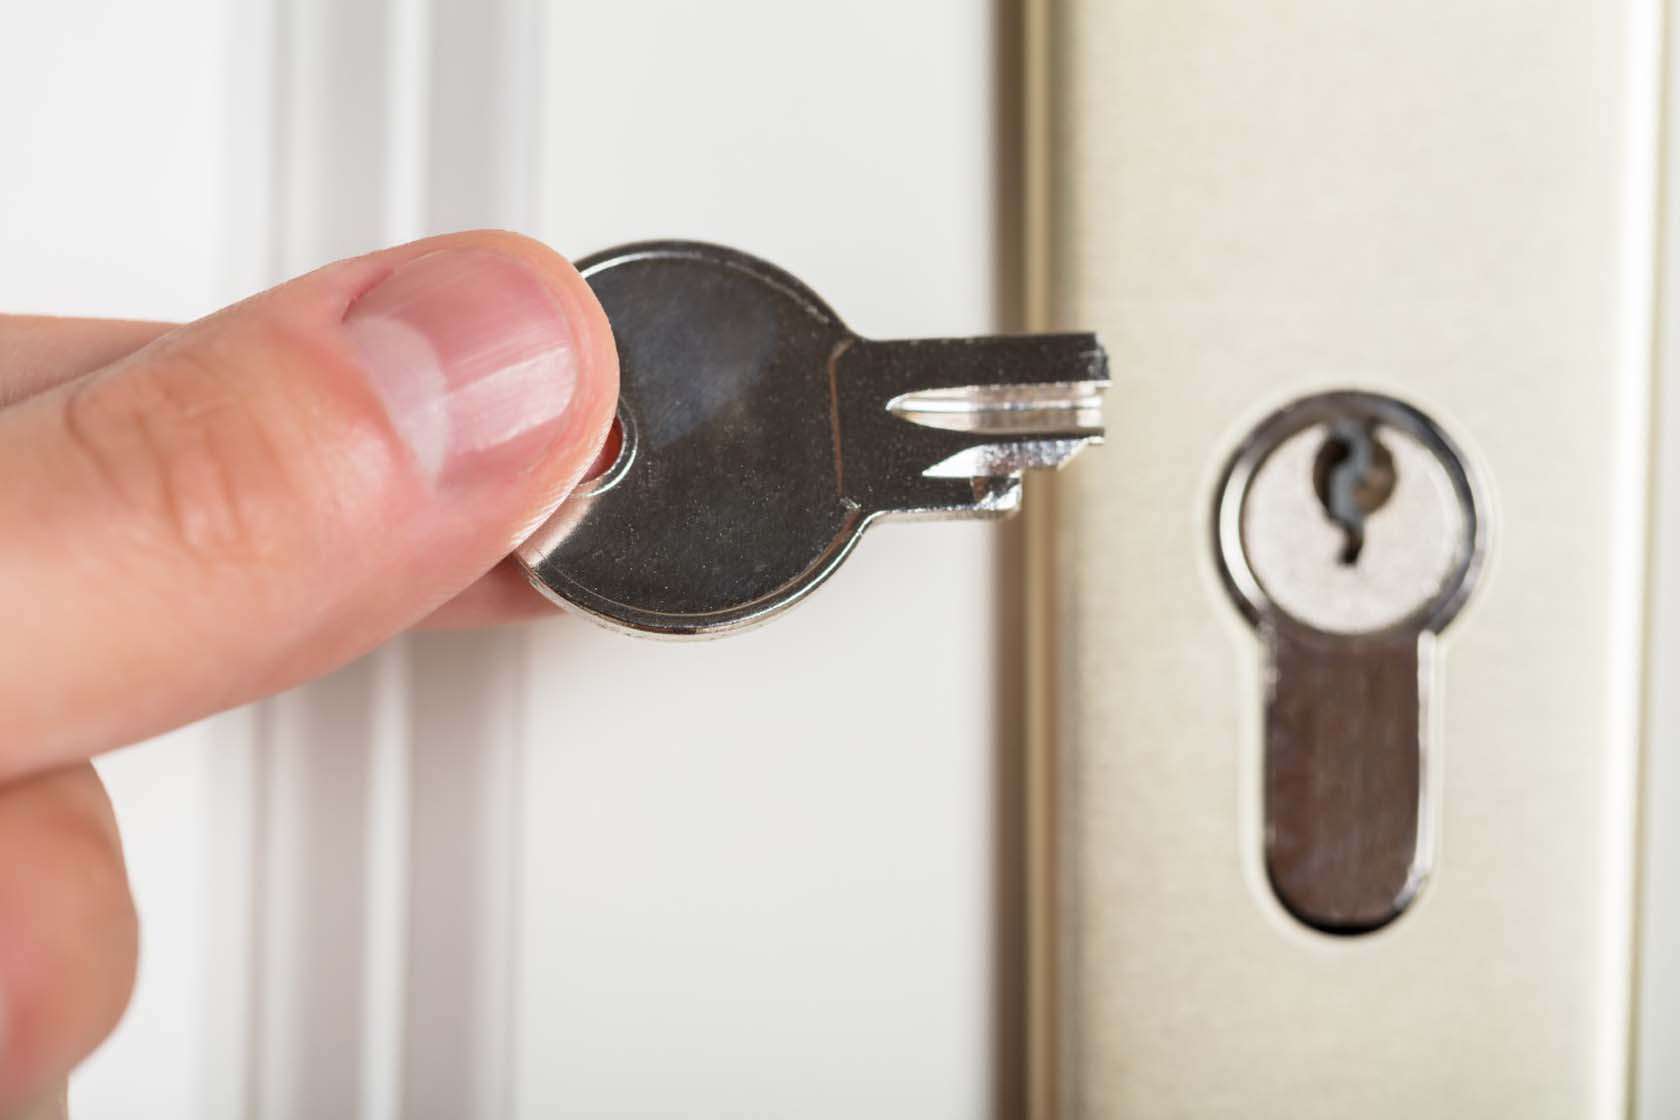 In need of an Emergency Locksmith Leeds? Rely on Locksmith Service 24/7